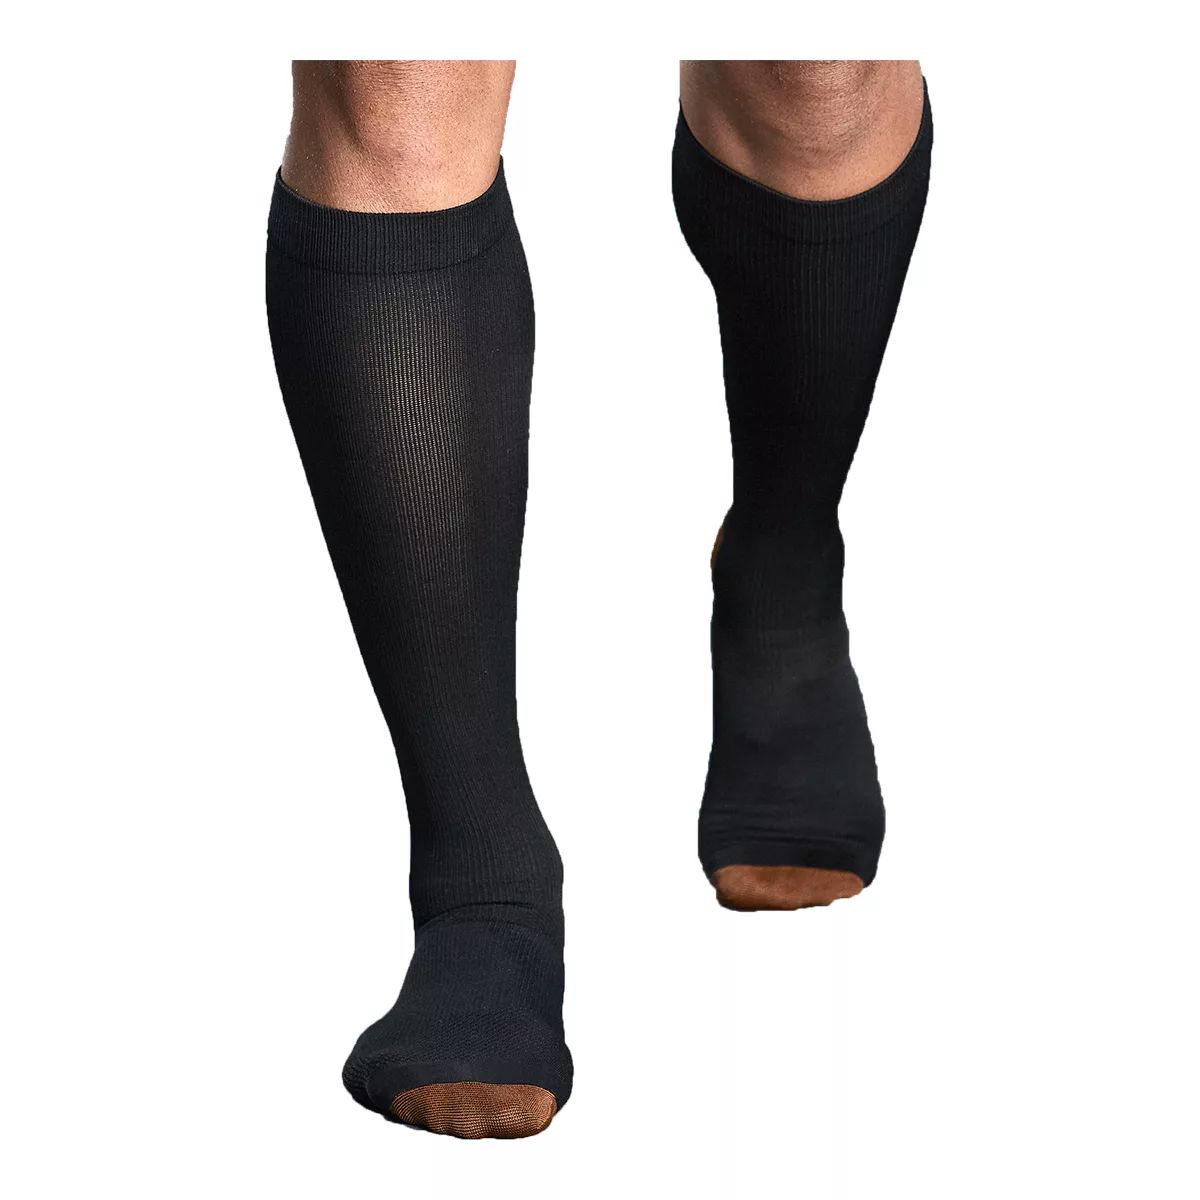 Tommie Copper Compression Sports Socks with UltraGuard Technology - Black,  Graduated Compression, Wide Top Band, Durable and Comfortable in the Sports  Equipment department at